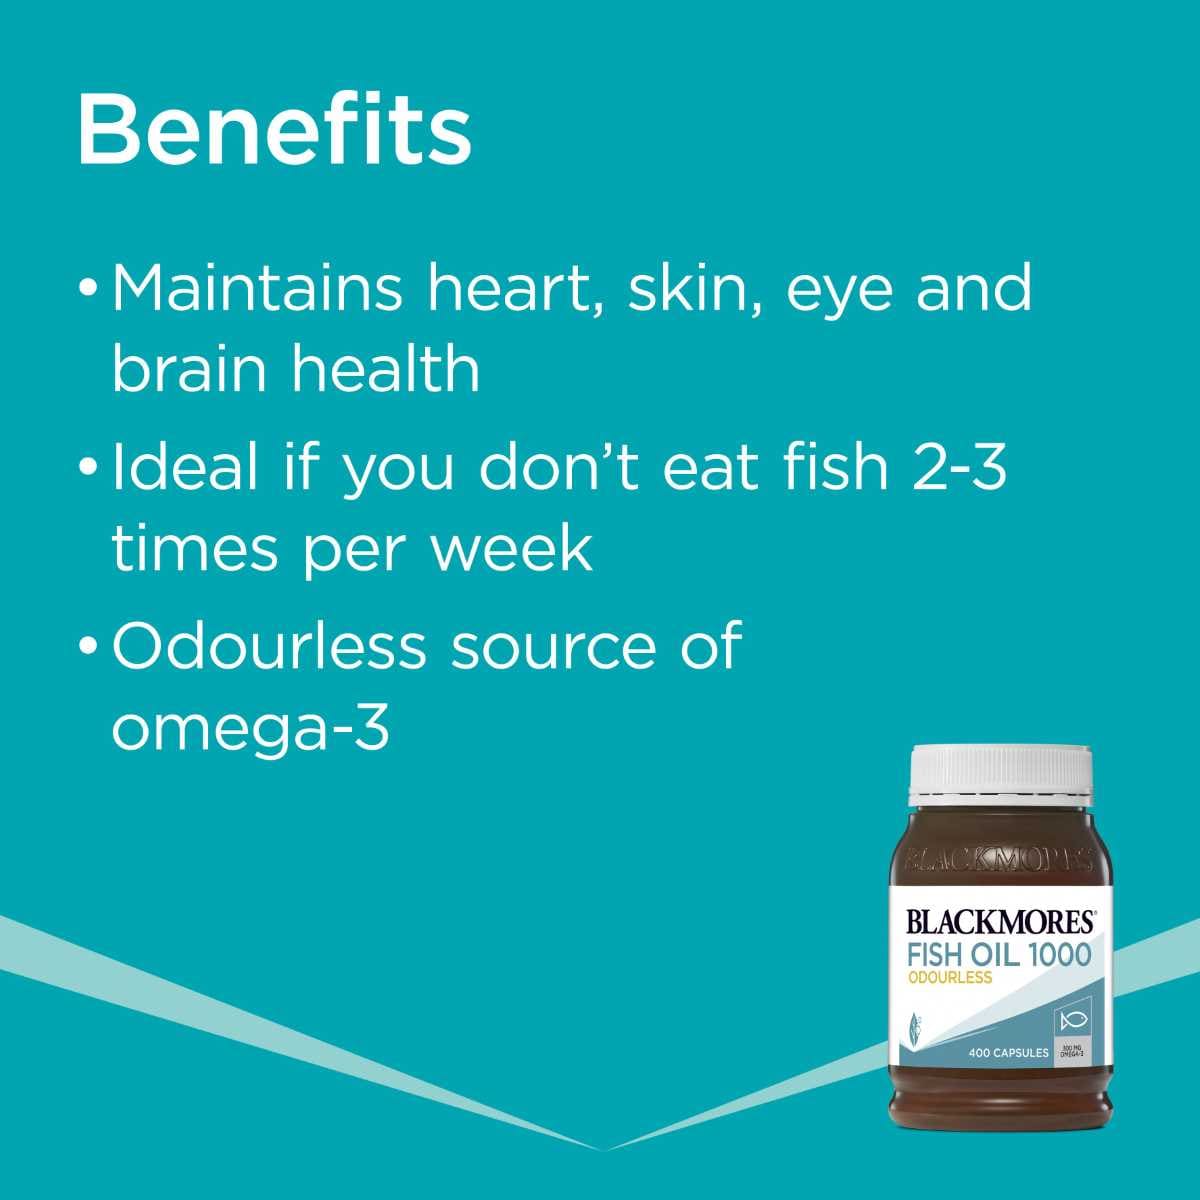 Blackmores Fish Oil Odourless 1000mg 400 Capsules